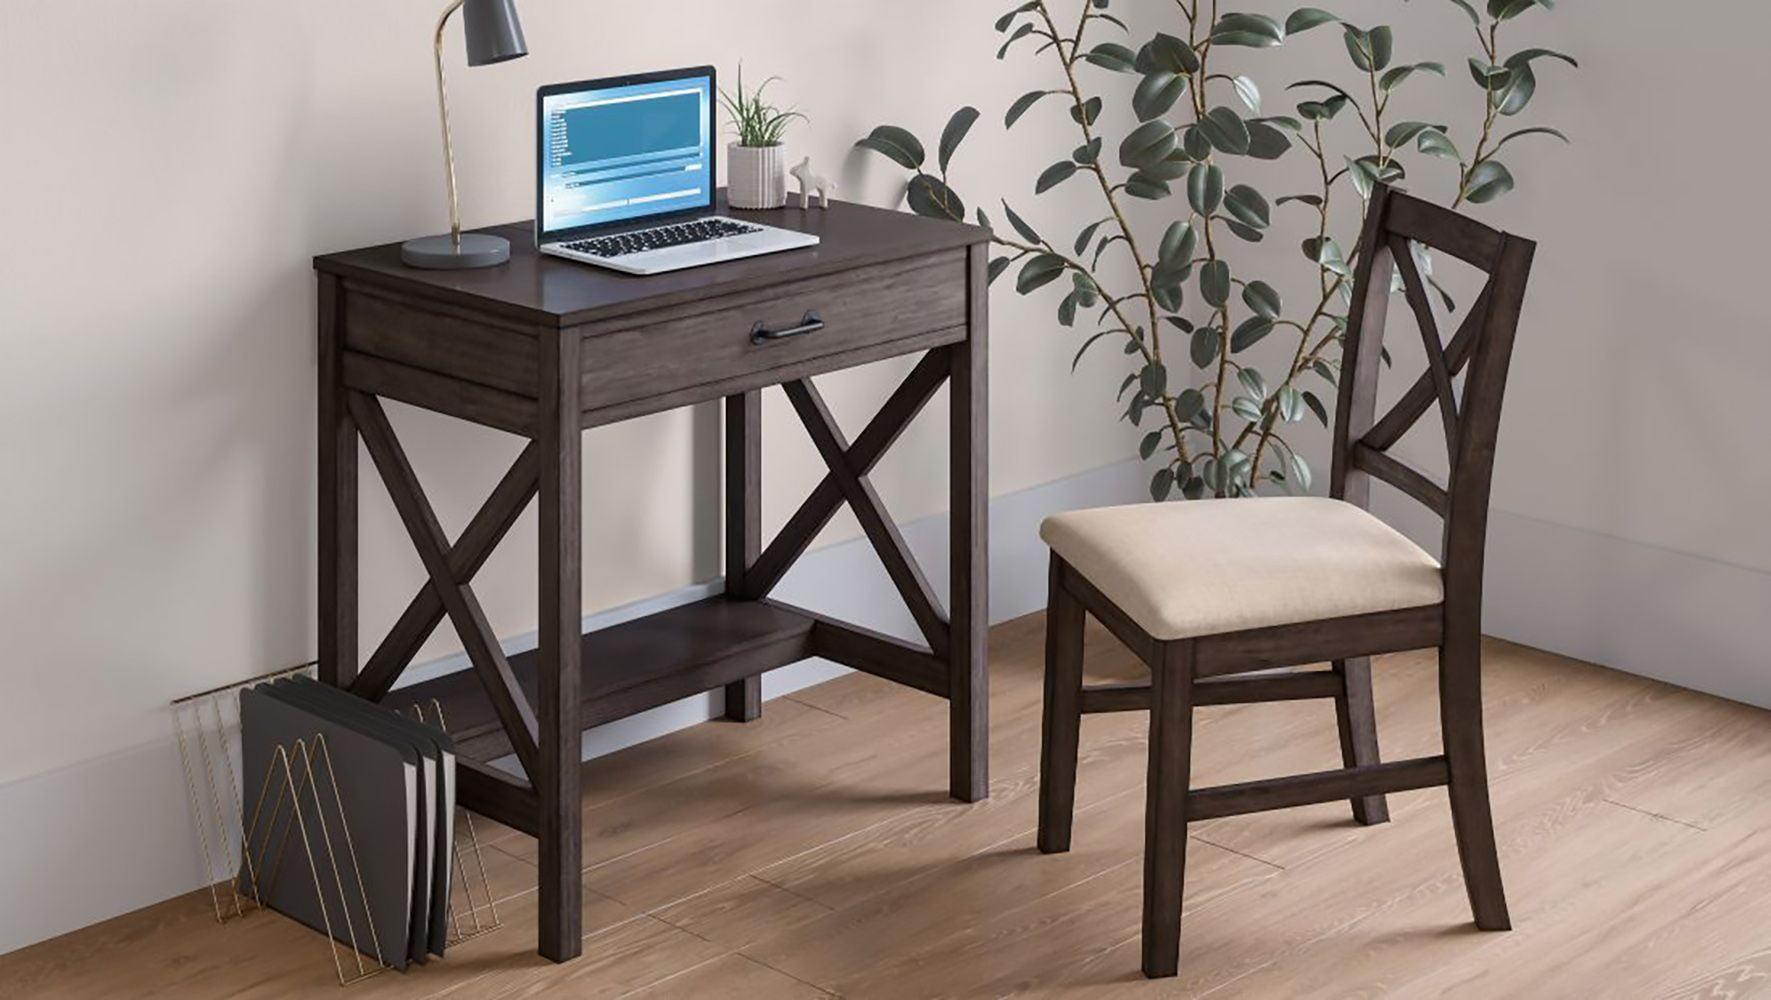 Hobson White Compact Computer Desk with Built-in USB and Power Outlet